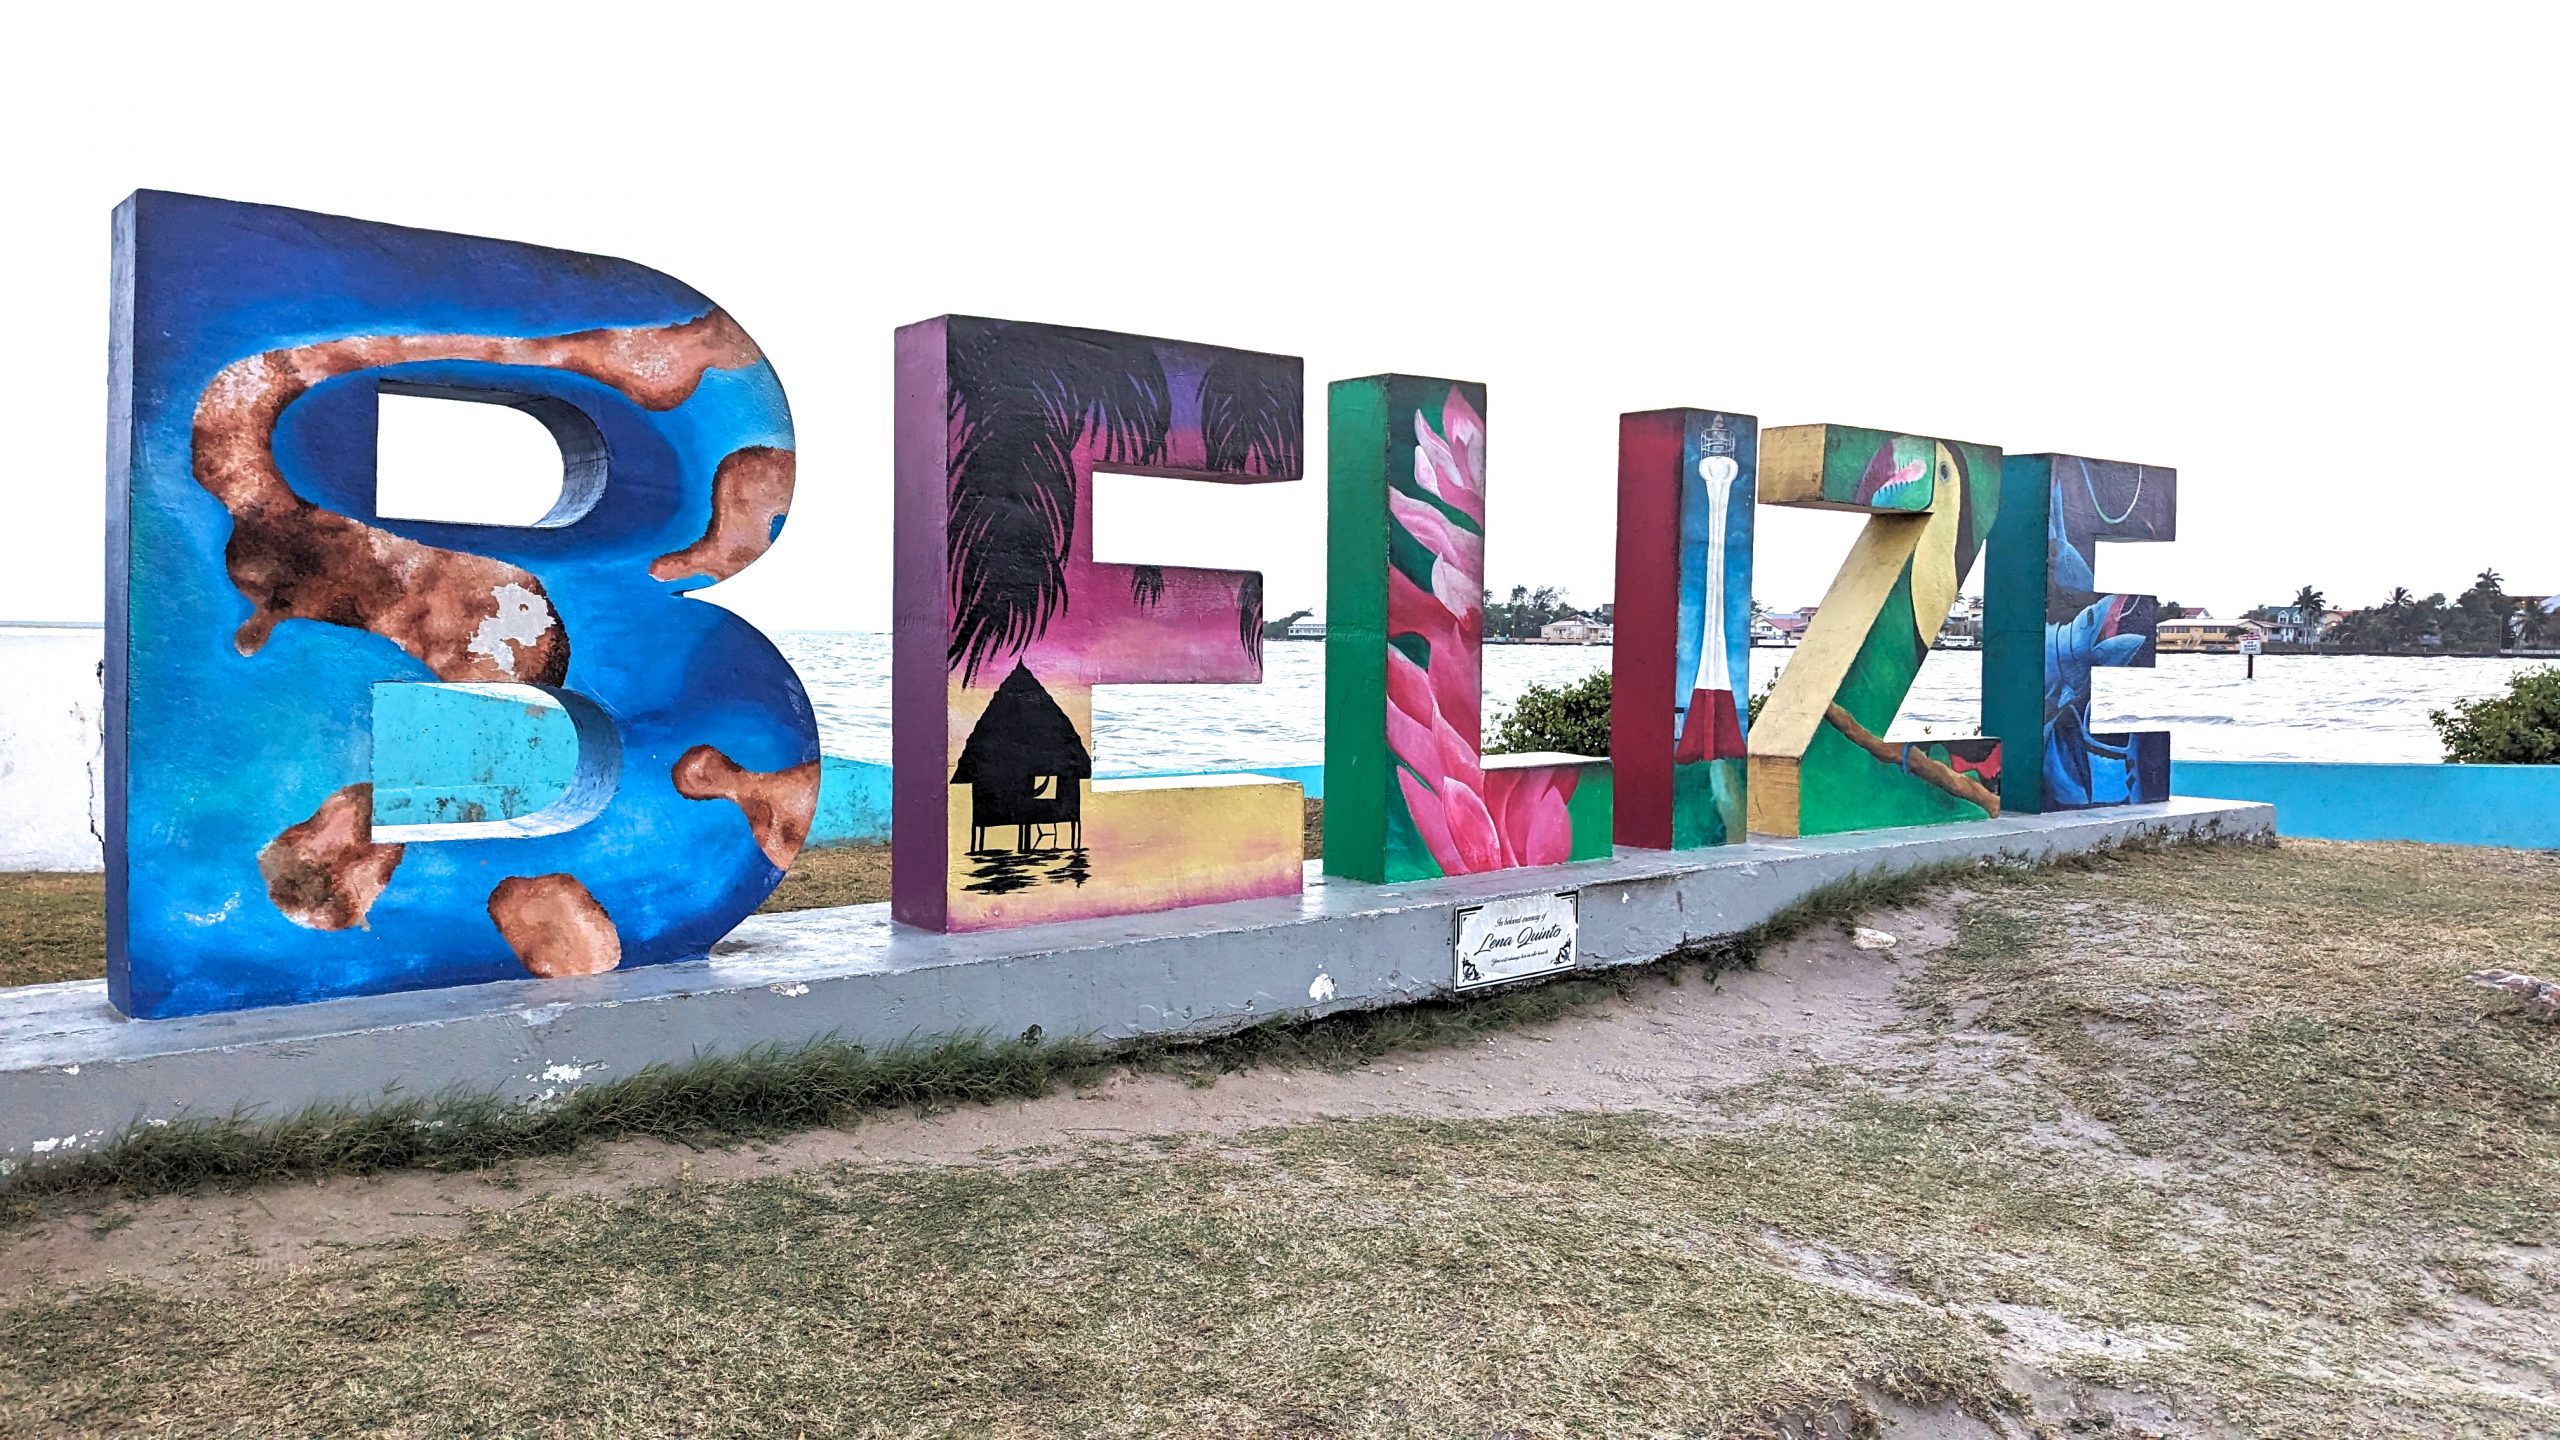 The Belize sign on the coast, in Belize City.